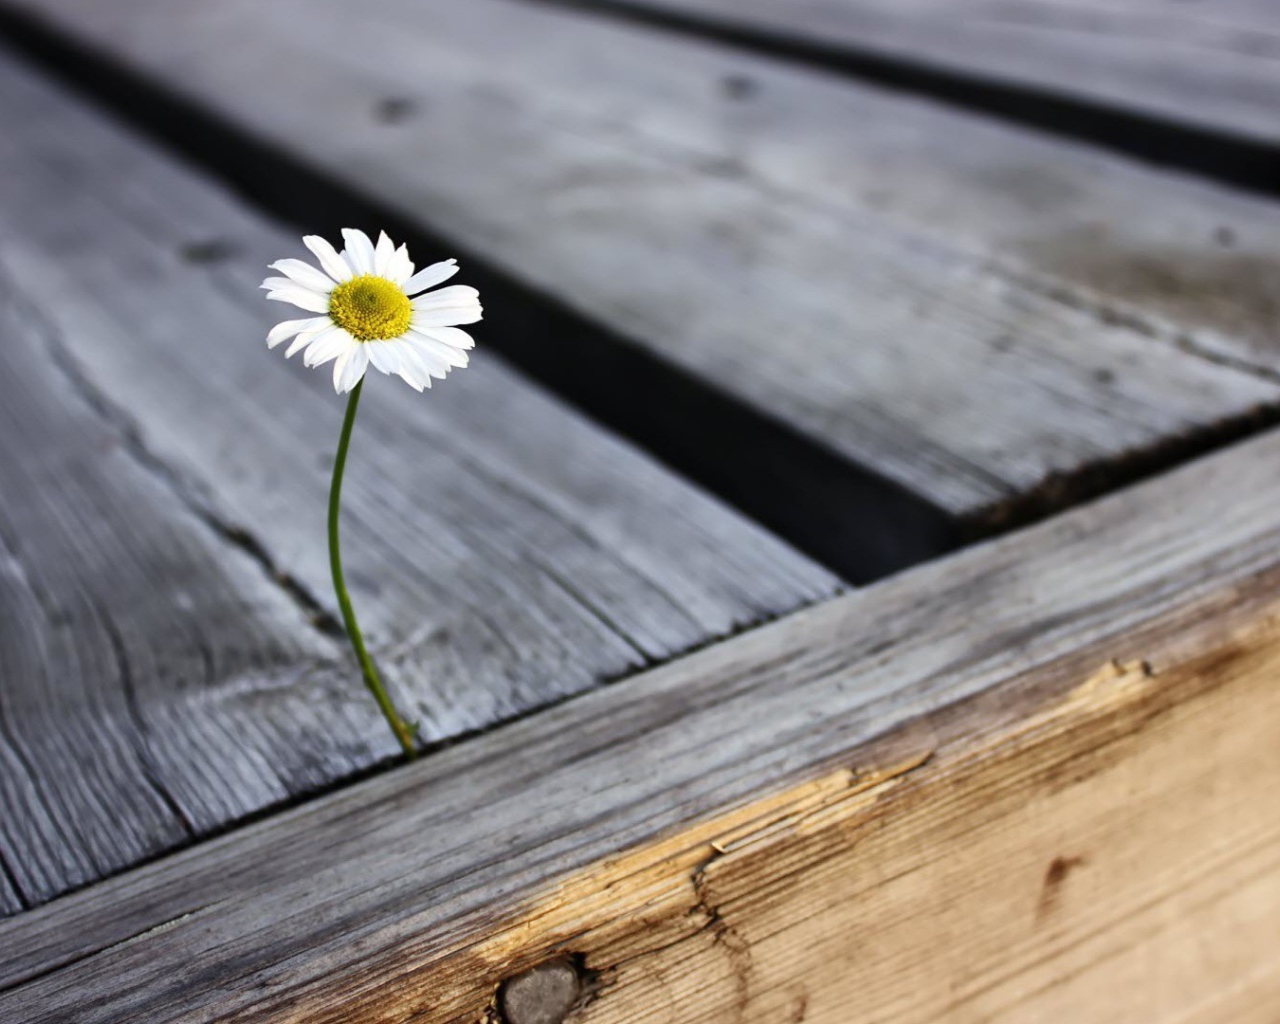 Chamomile sprouted between boards